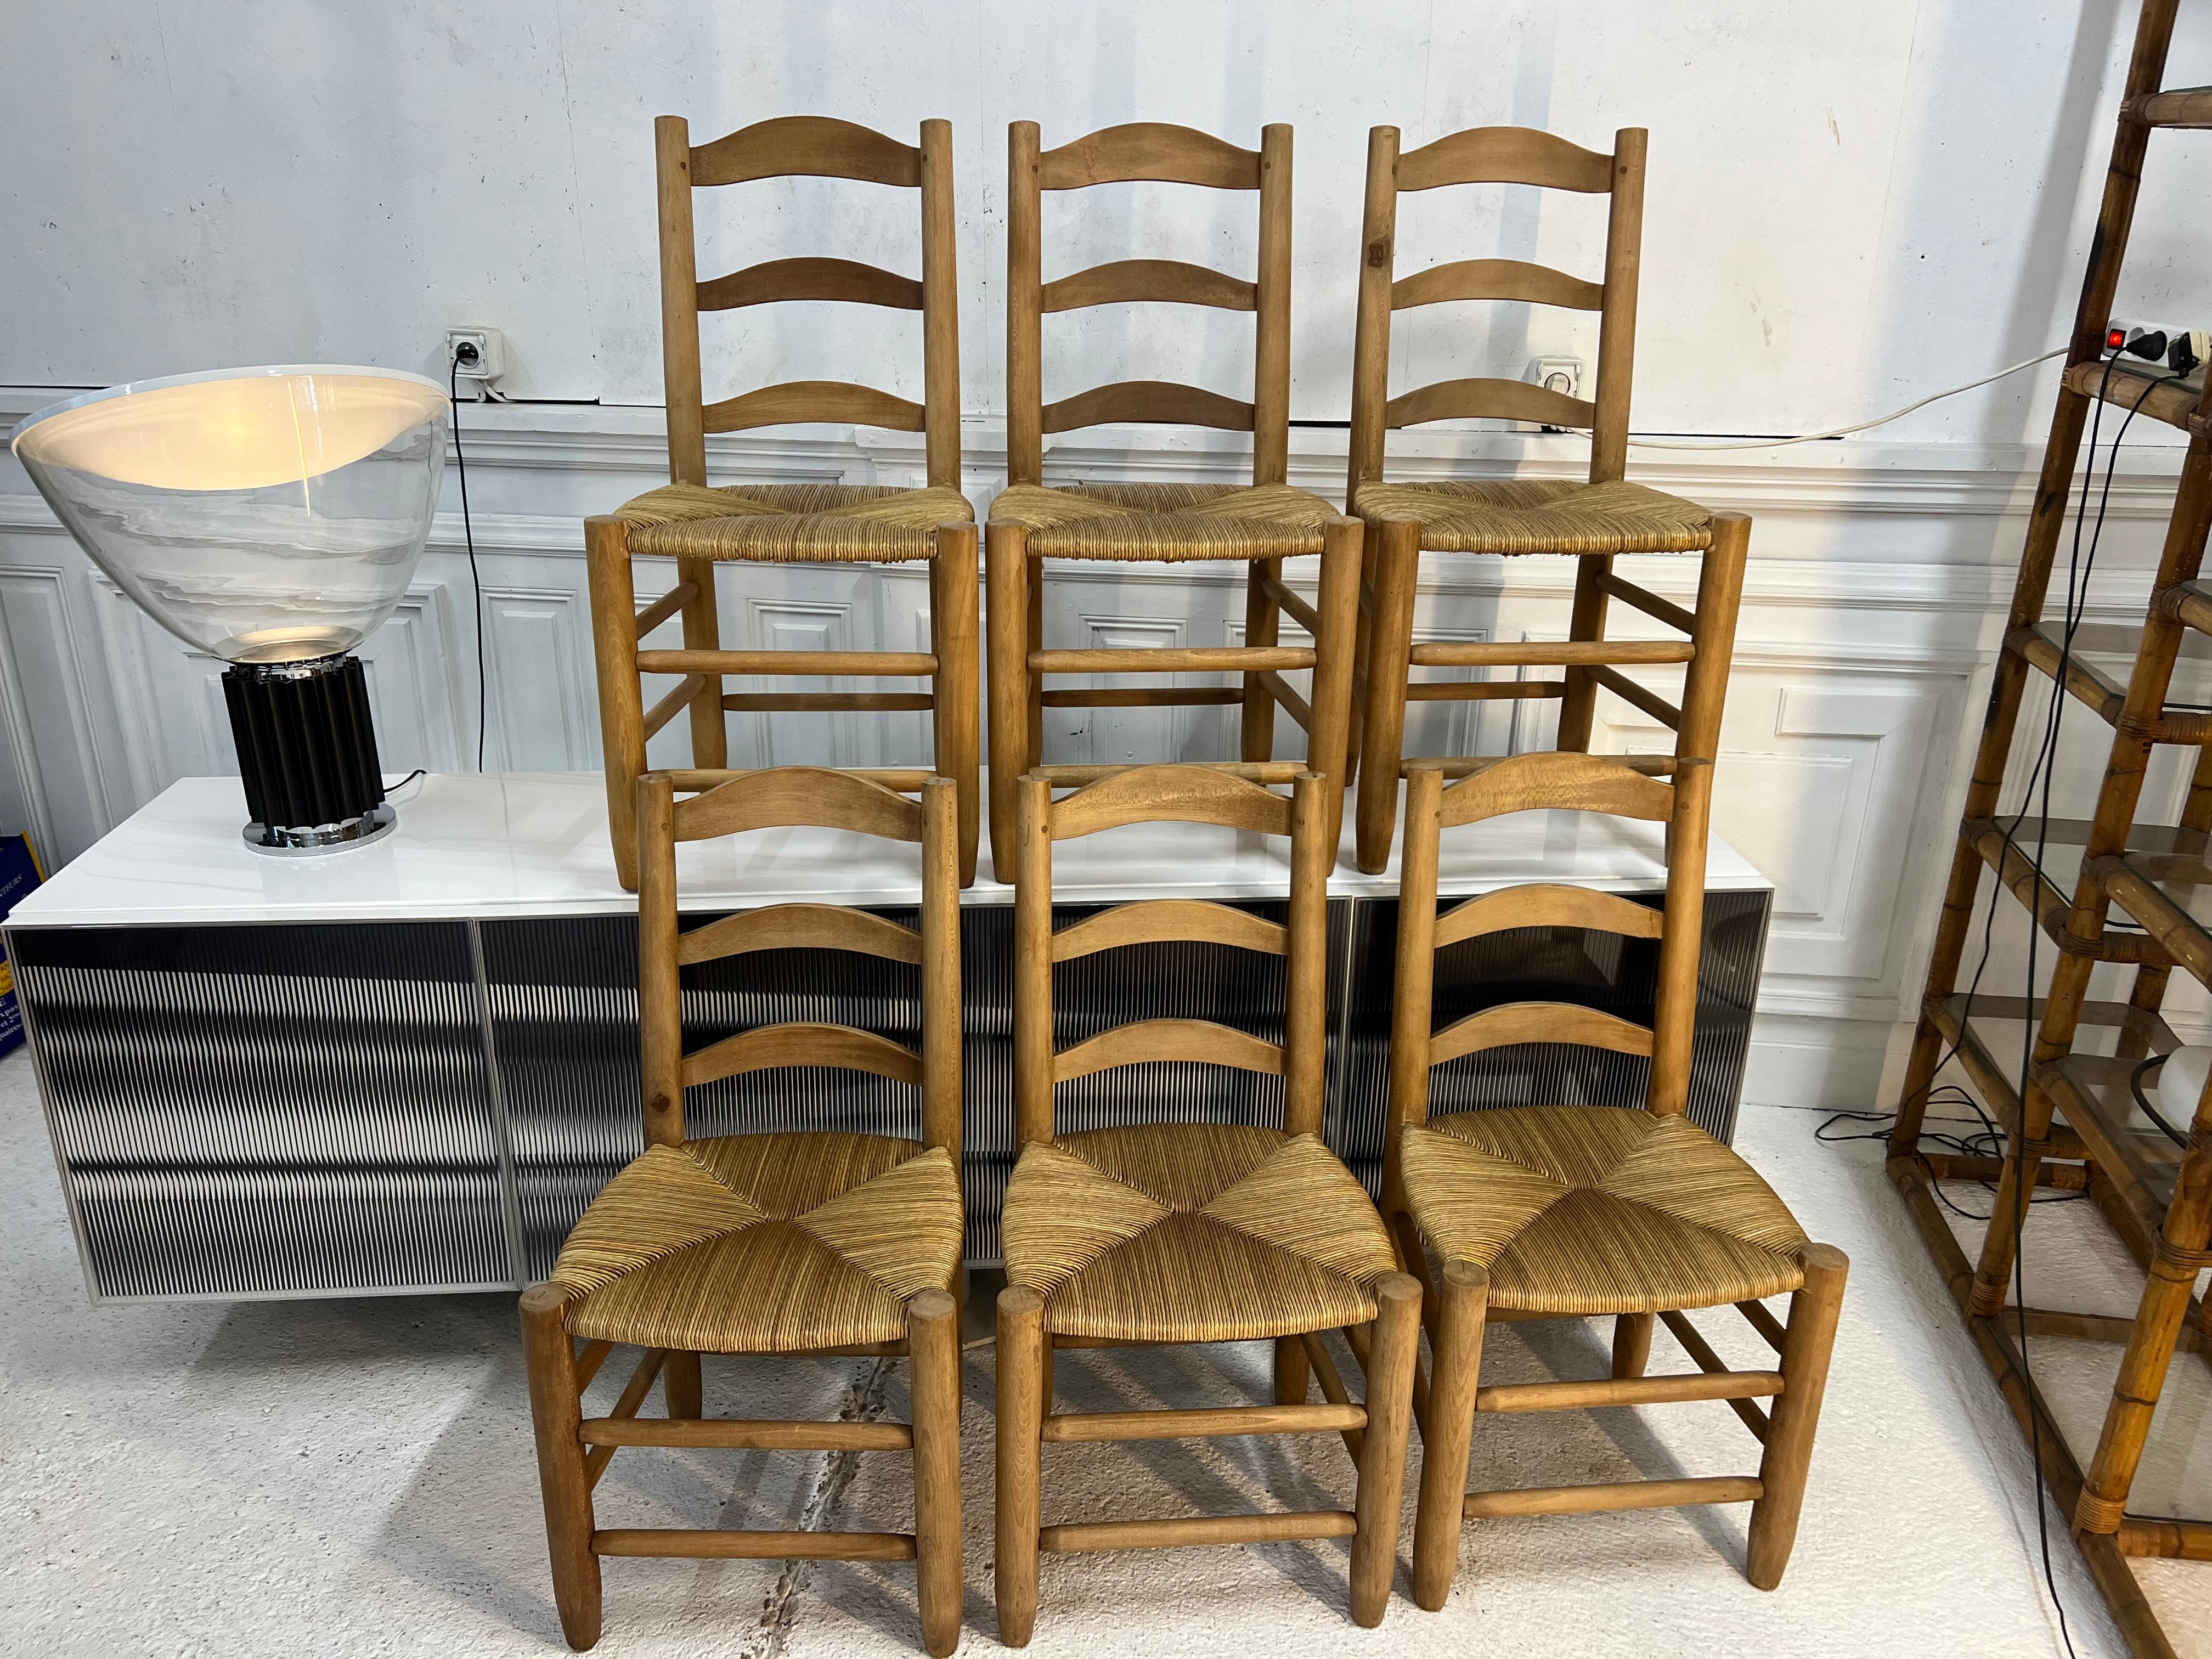 a pretty series of 6 rustic chairs by Charlotte Perriand
the chairs have been freshly reupholstered by a specialist
the beech structure is very solid with a beautiful 60's patina

 

Born to a tailor father and a seamstress mother for haute couture